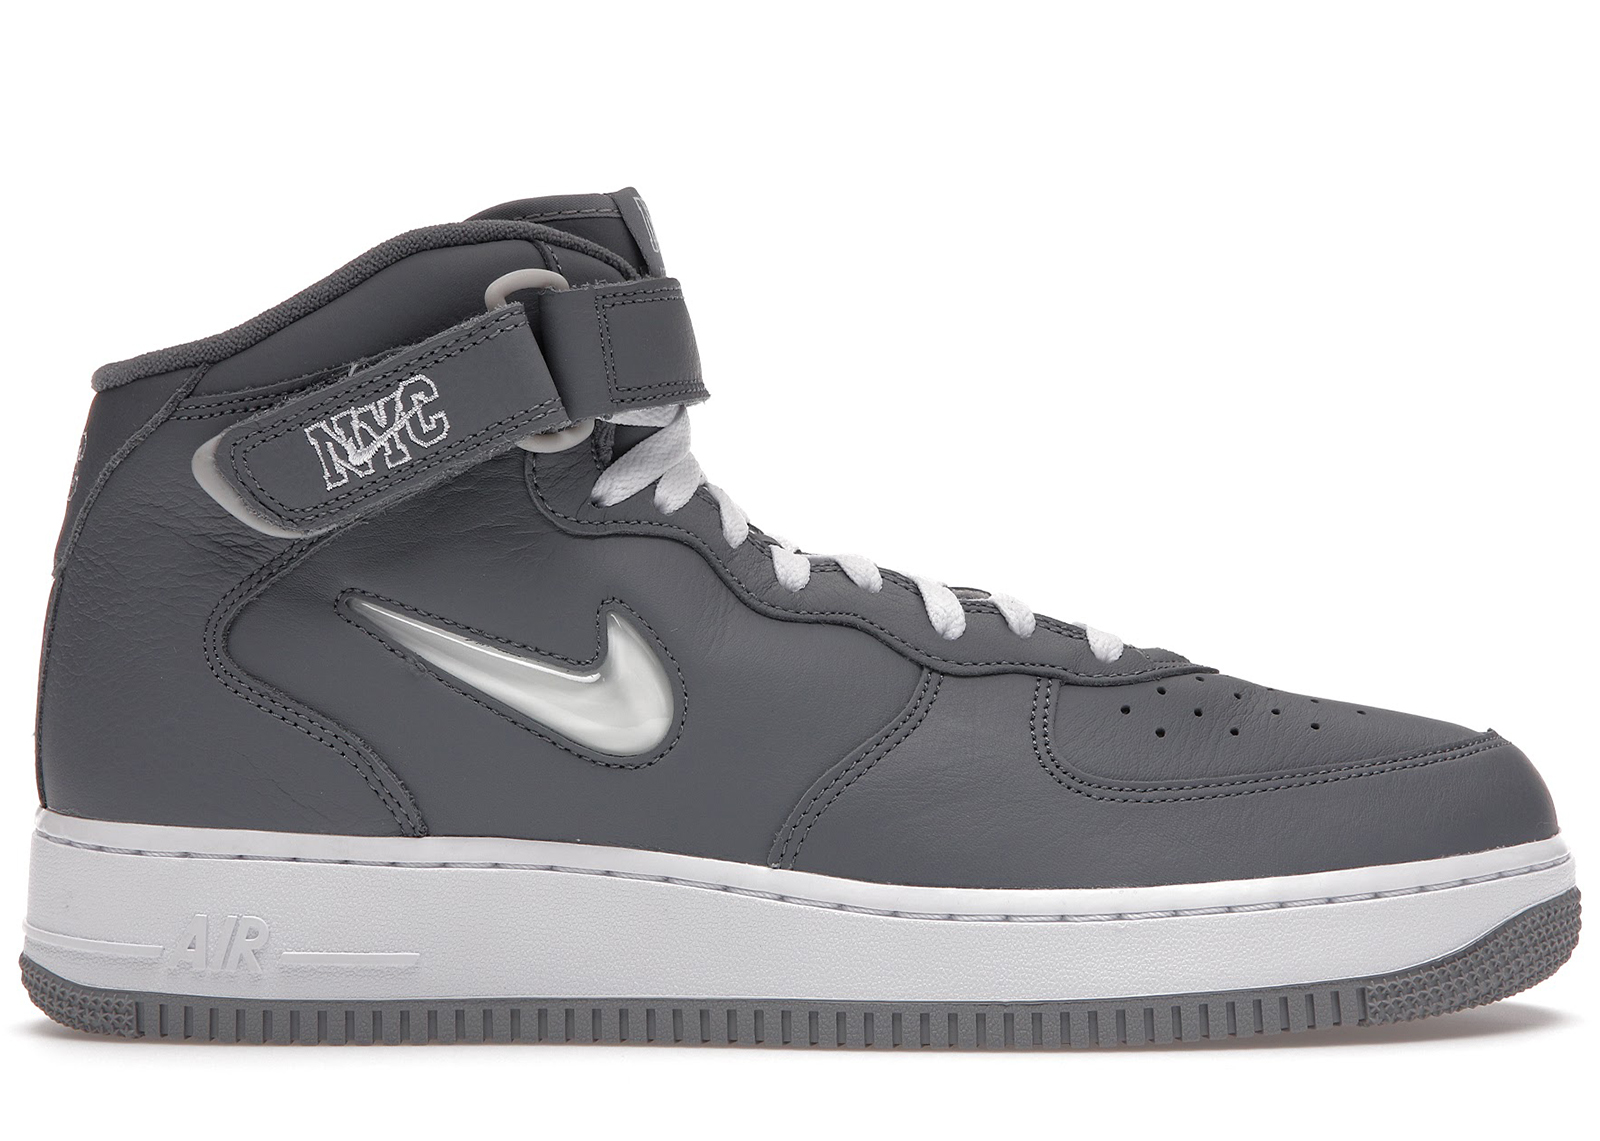 Nike Air Force 1 Mid QS Jewel NYC Cool Grey Men's - DH5622-001 - US